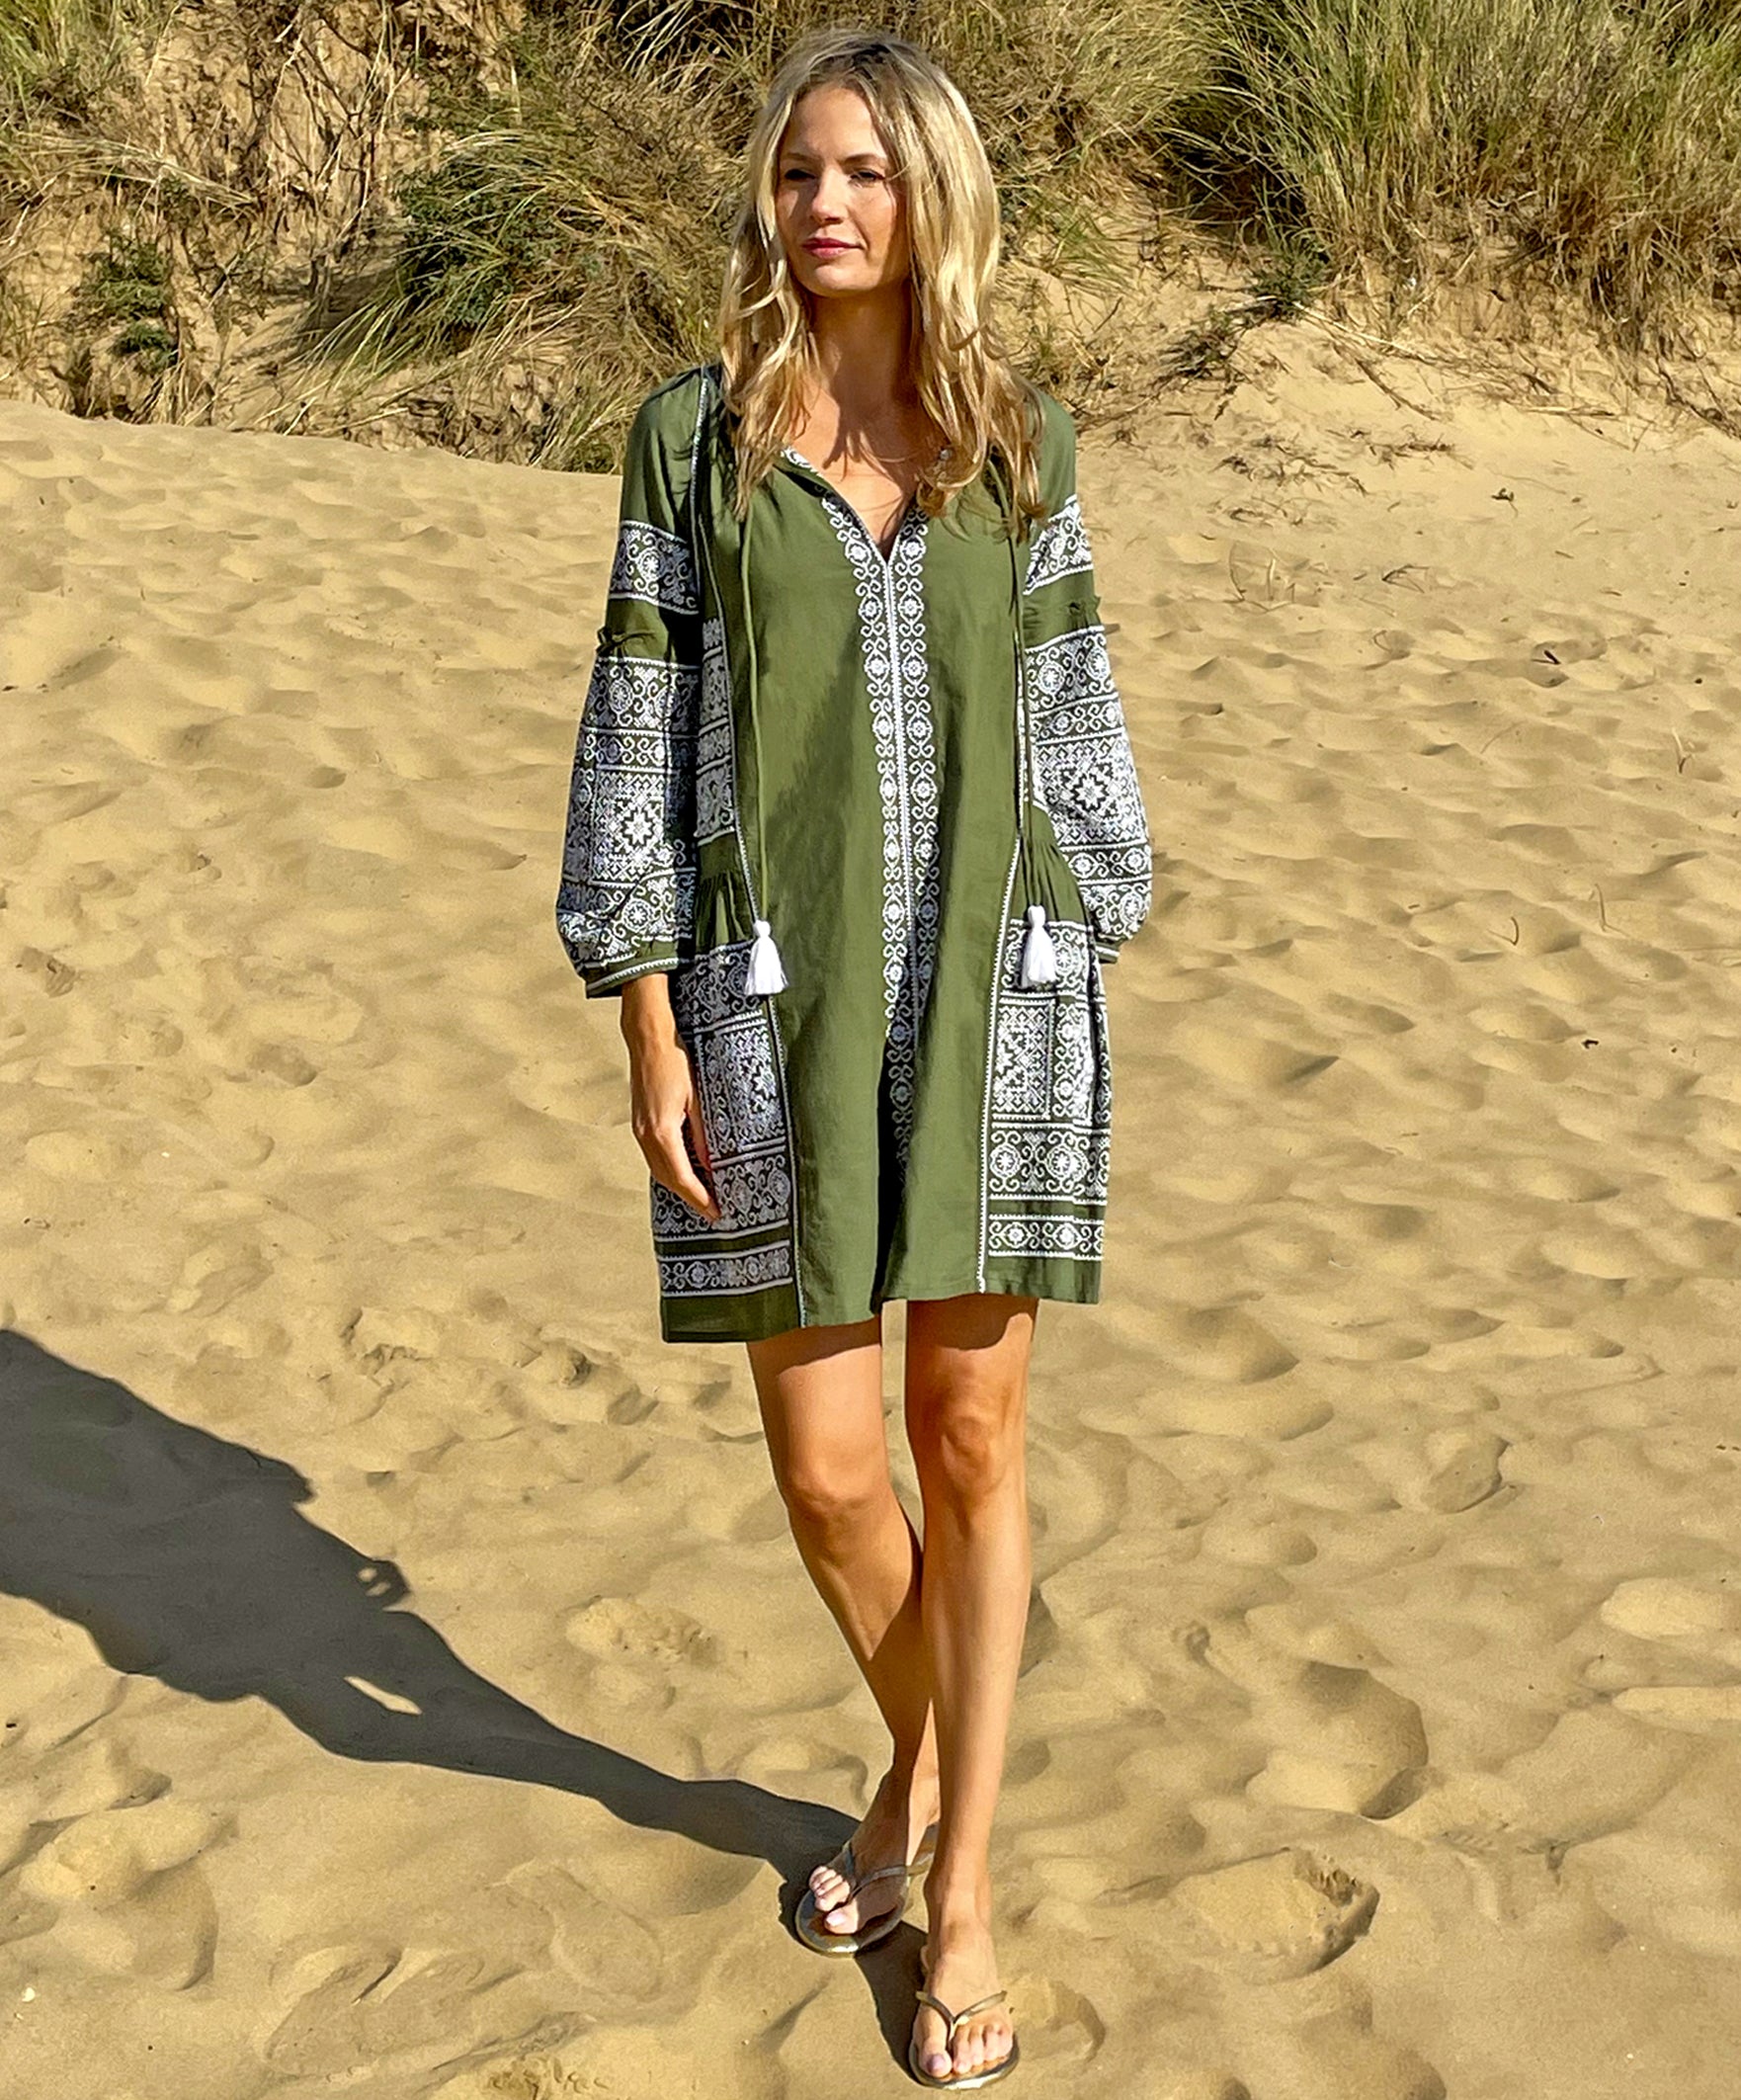 A model on a beach wearing the Rose and Rose Como embroidered dress in olive cotton.